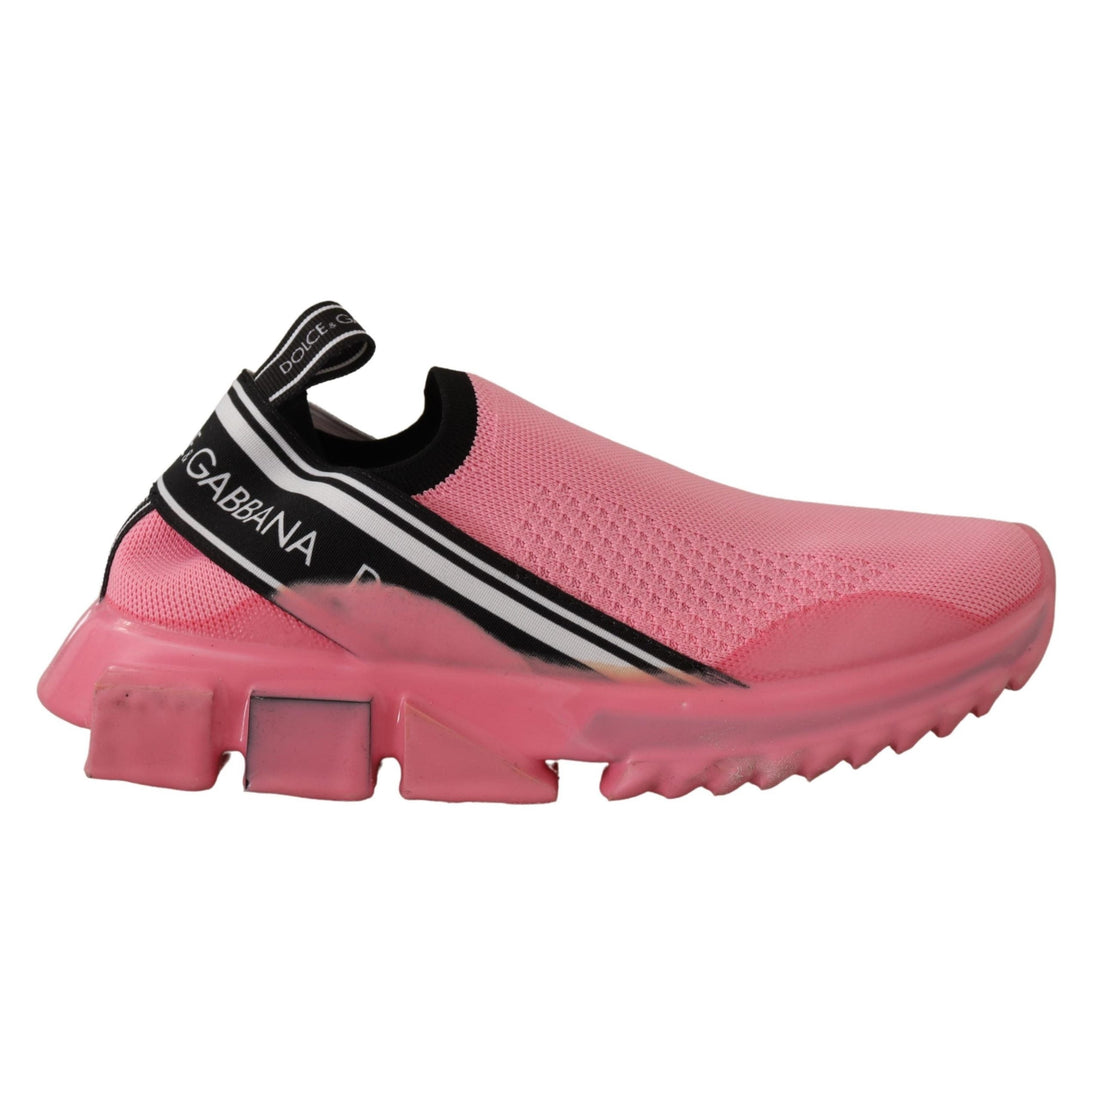 Dolce & Gabbana Pink Low Top Slip On Casual Sorrento Sneakers